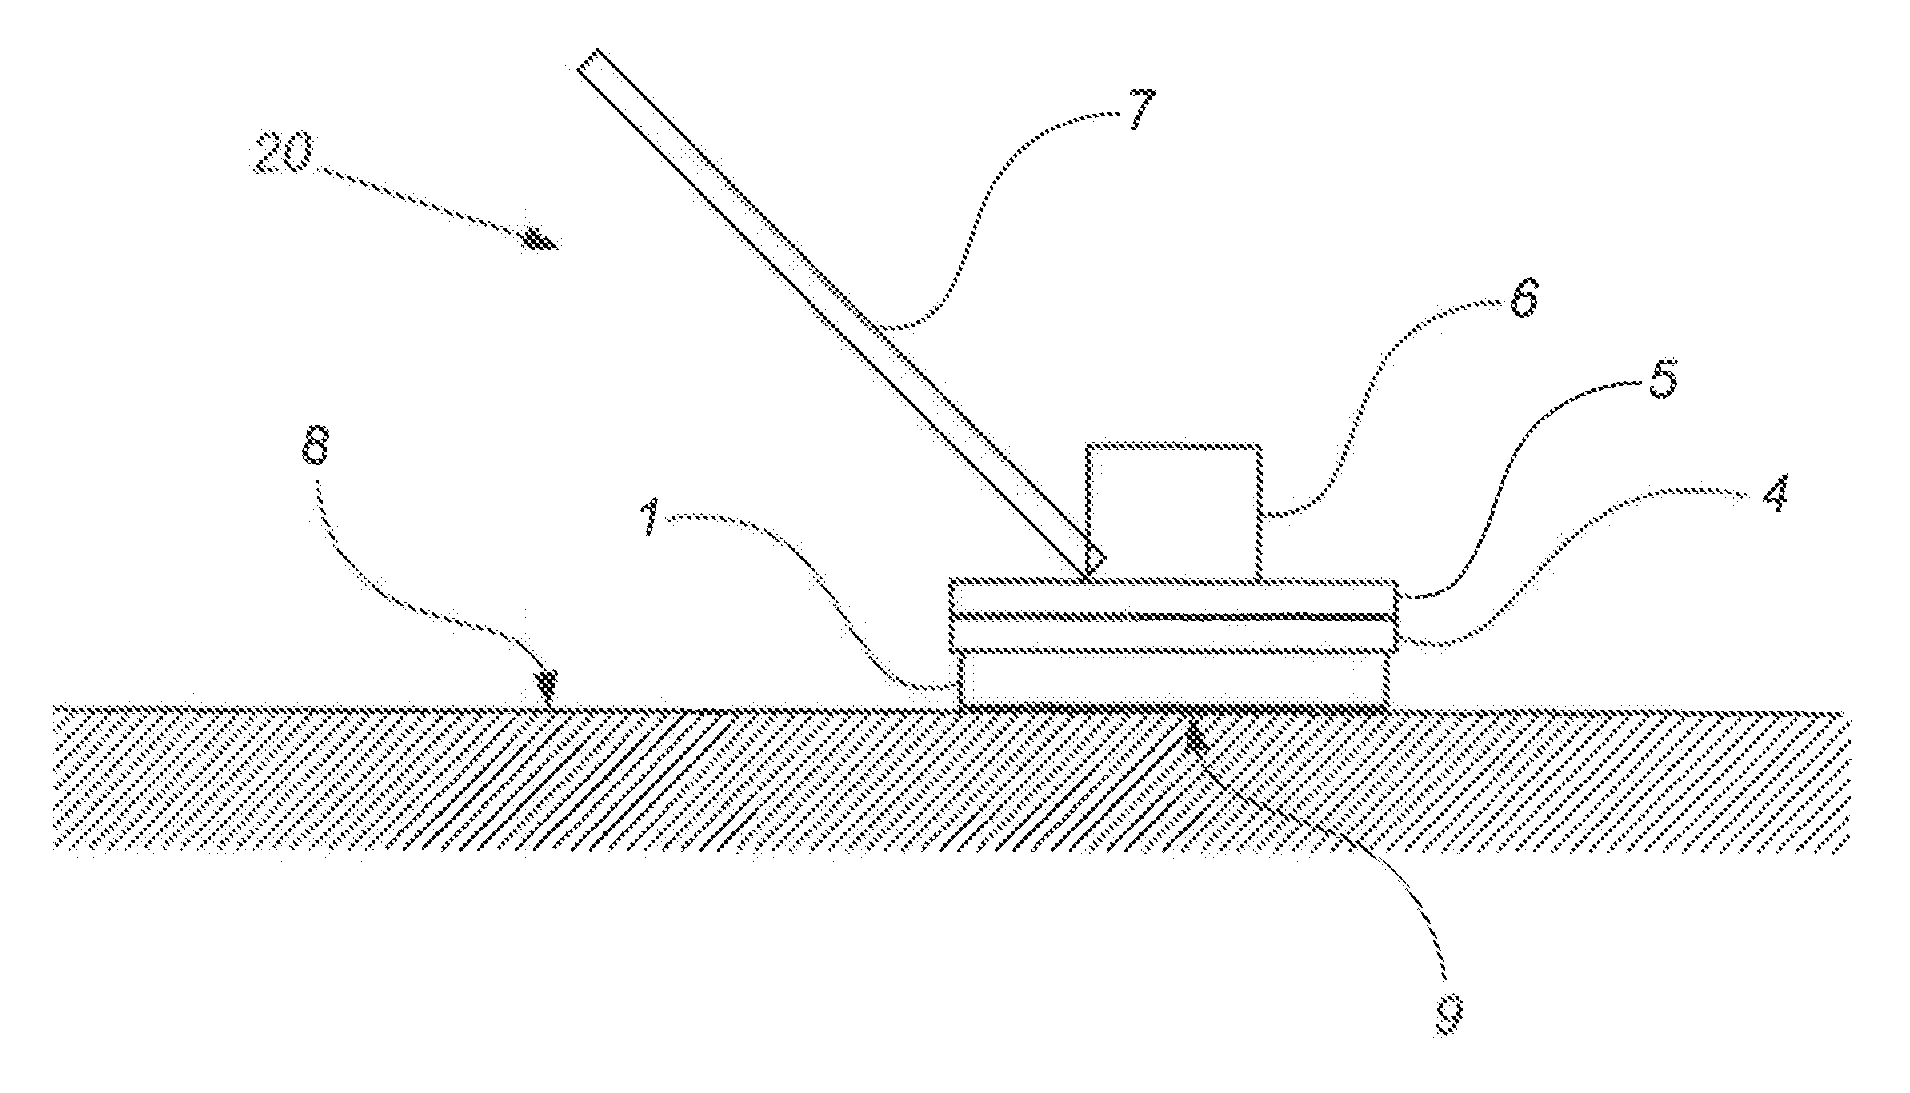 Methods and tool for maintenance of hard surfaces, and a method for manufacturing such a tool